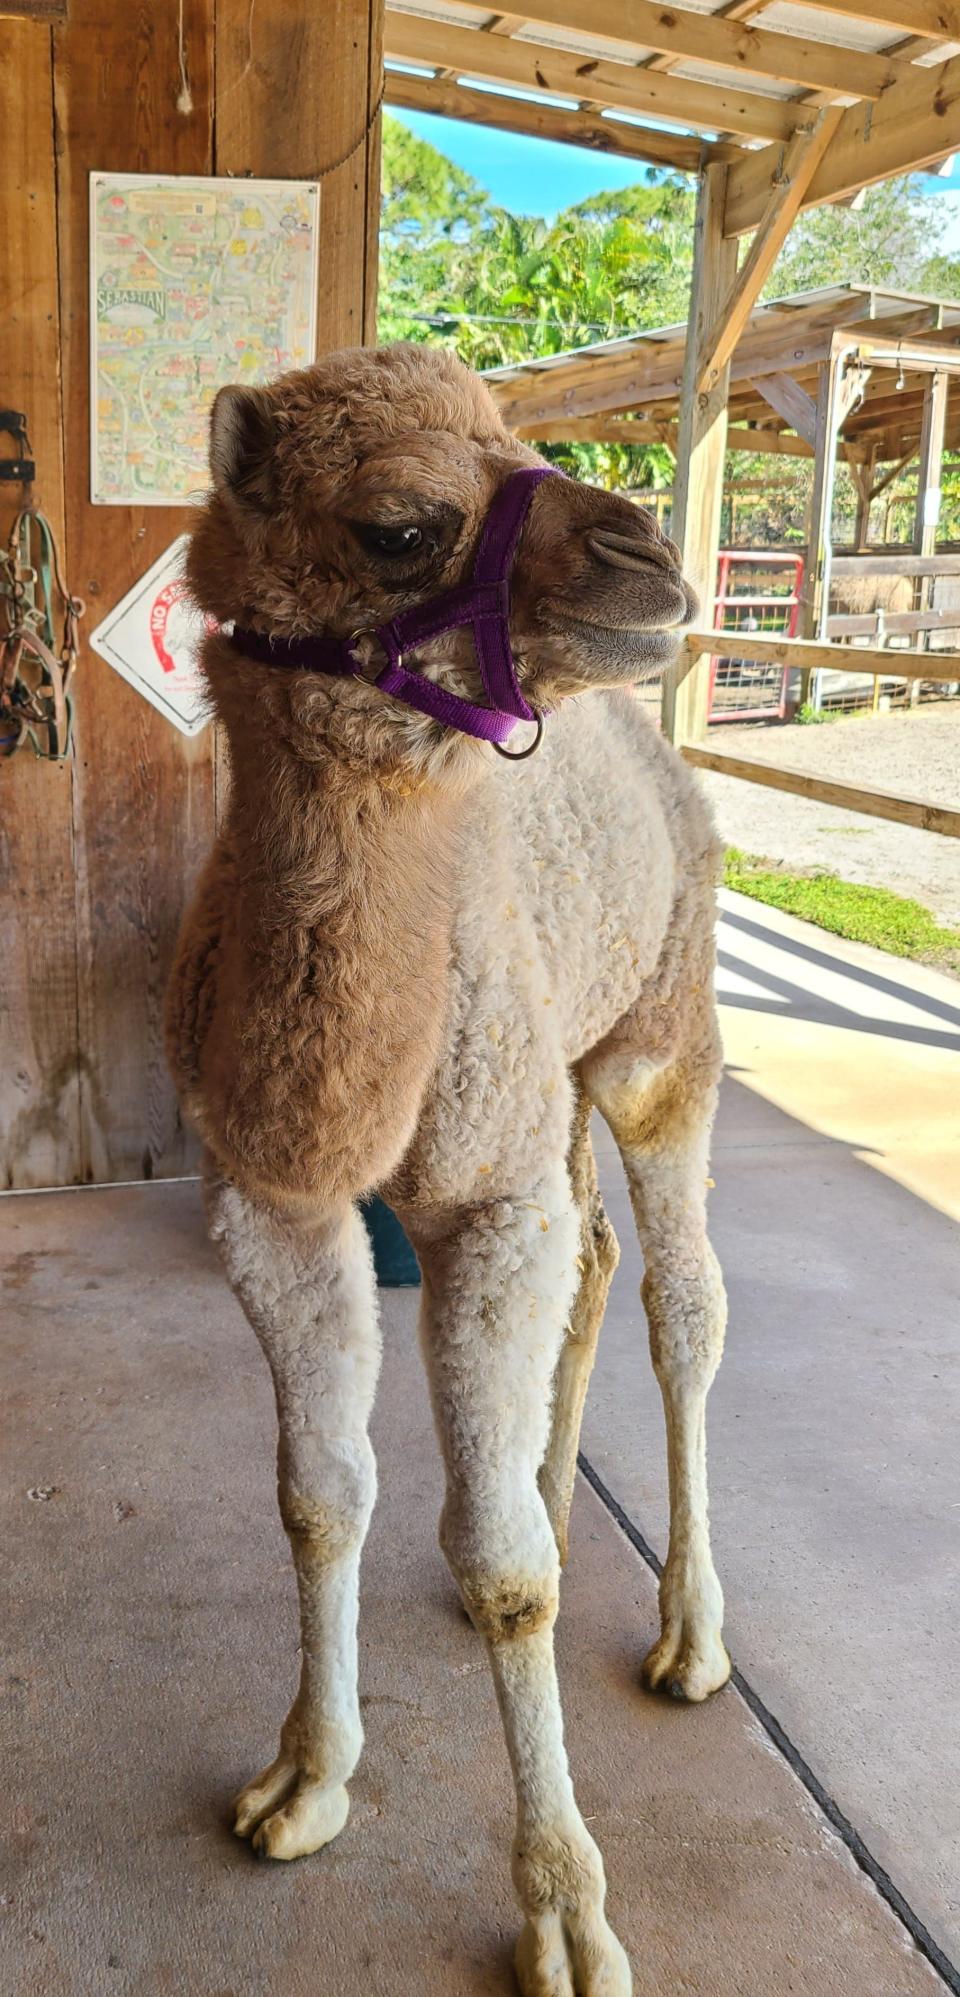 The baby camel at LaPorte Farms in Sebastian was given a name at her Feb. 25 baby shower.